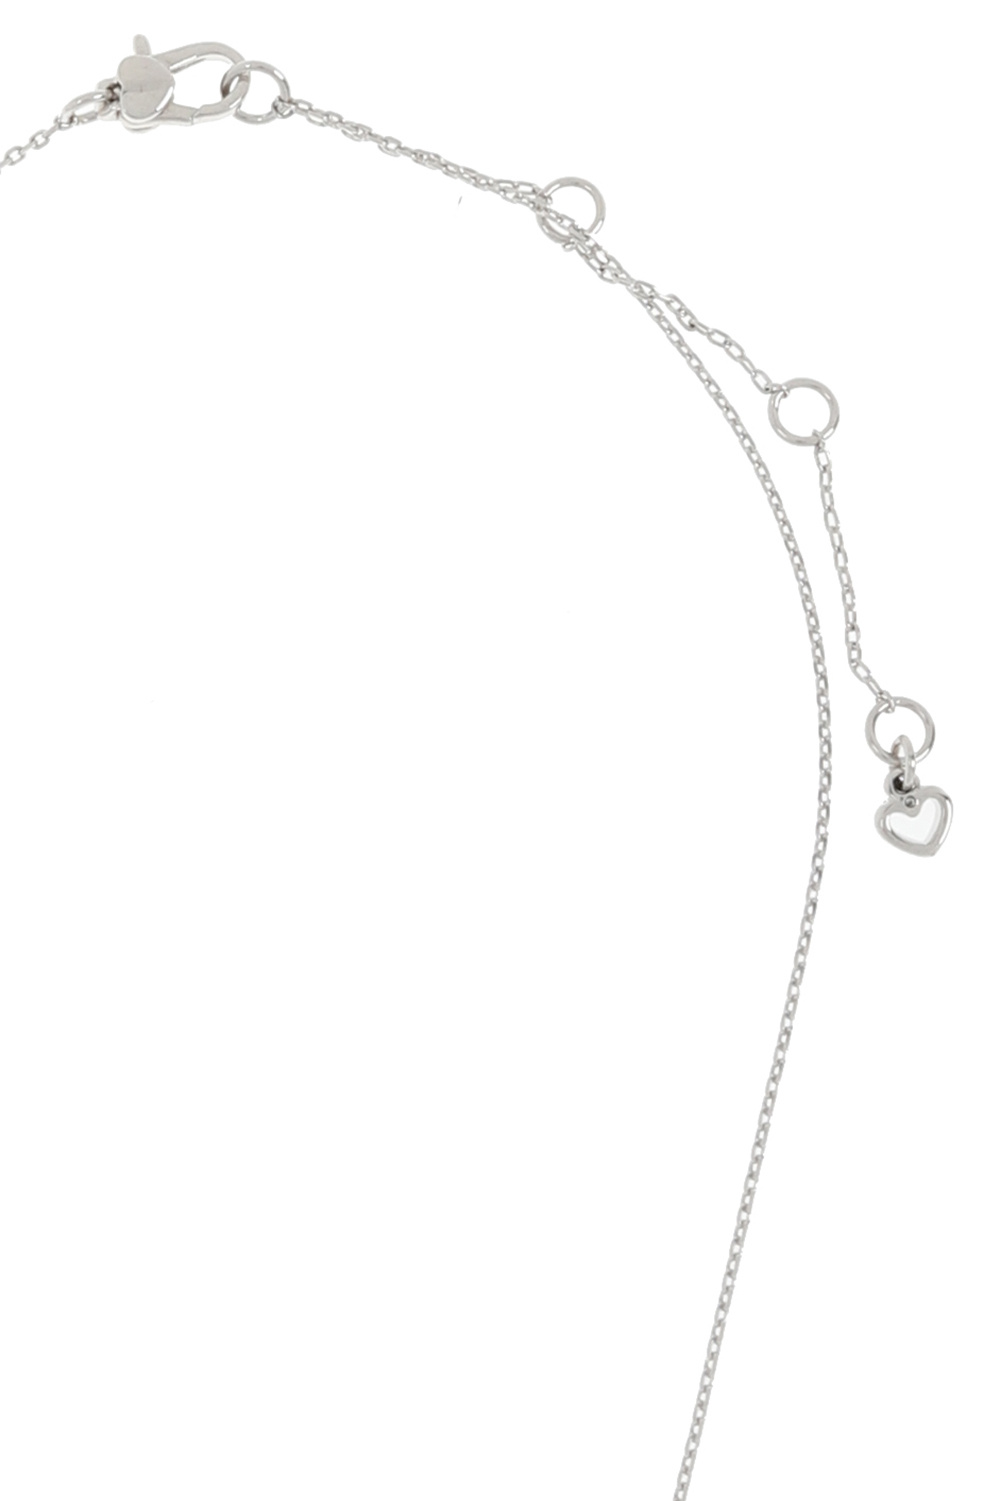 Kate Spade ‘Say Yes’ necklace